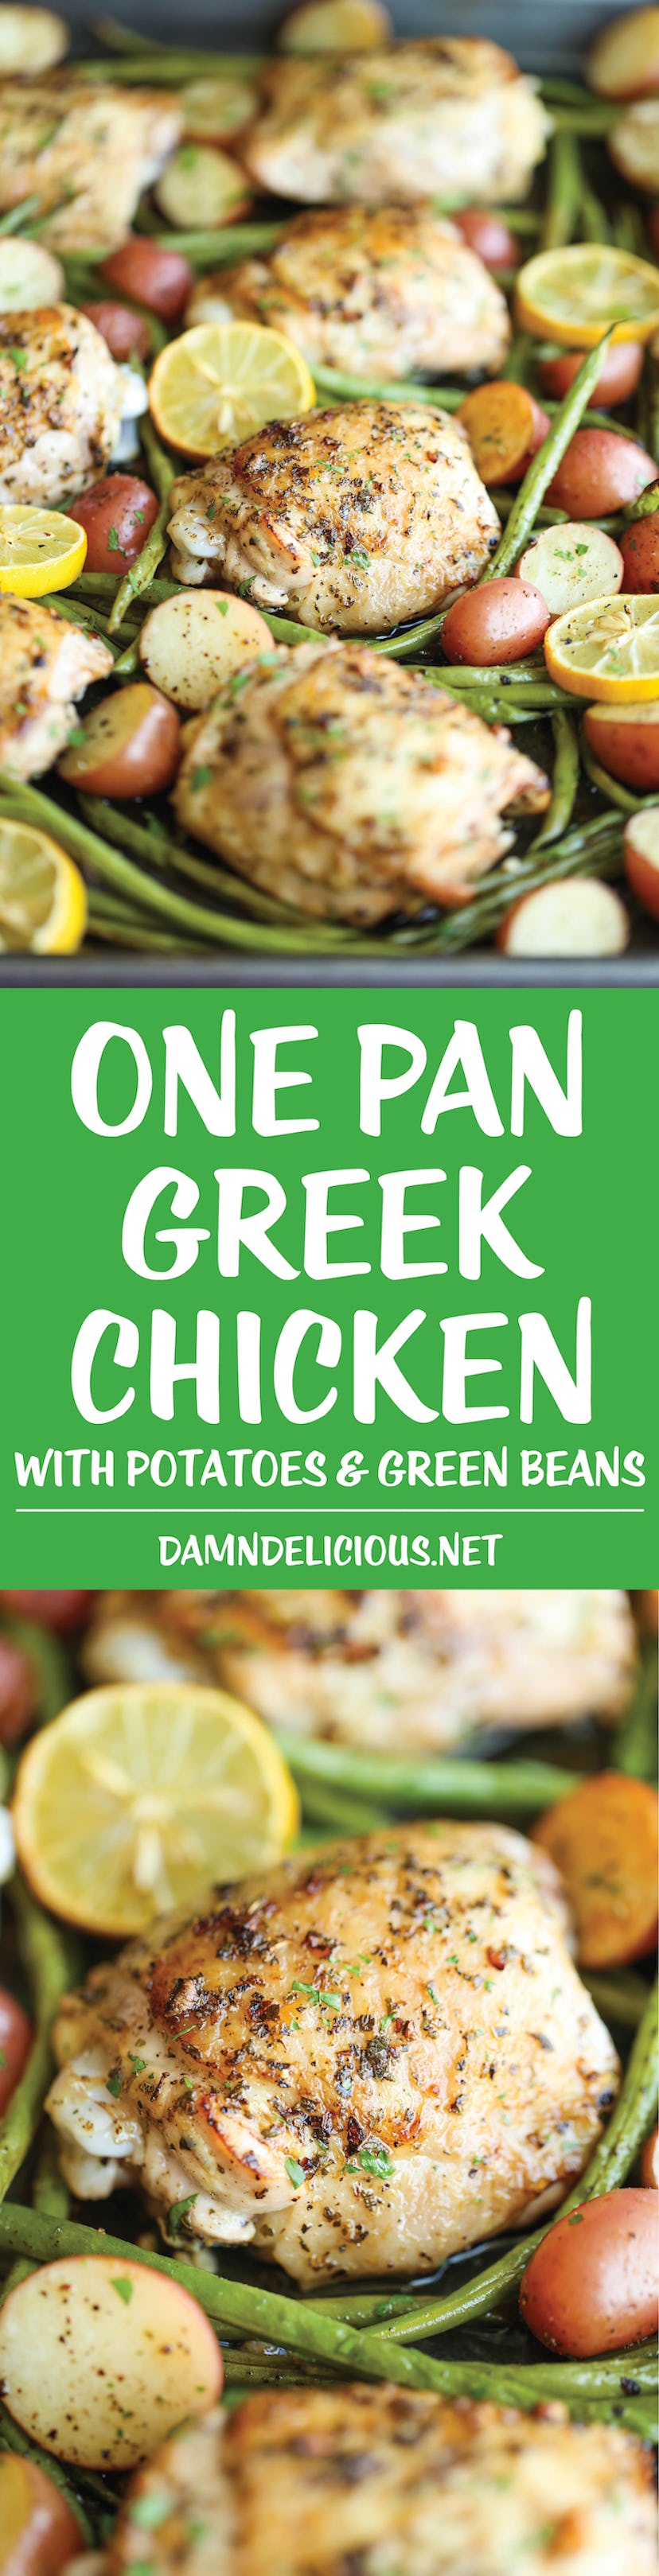 sheet pan recipes with chicken thighs, one pan greek chicken with green beans and potatoes